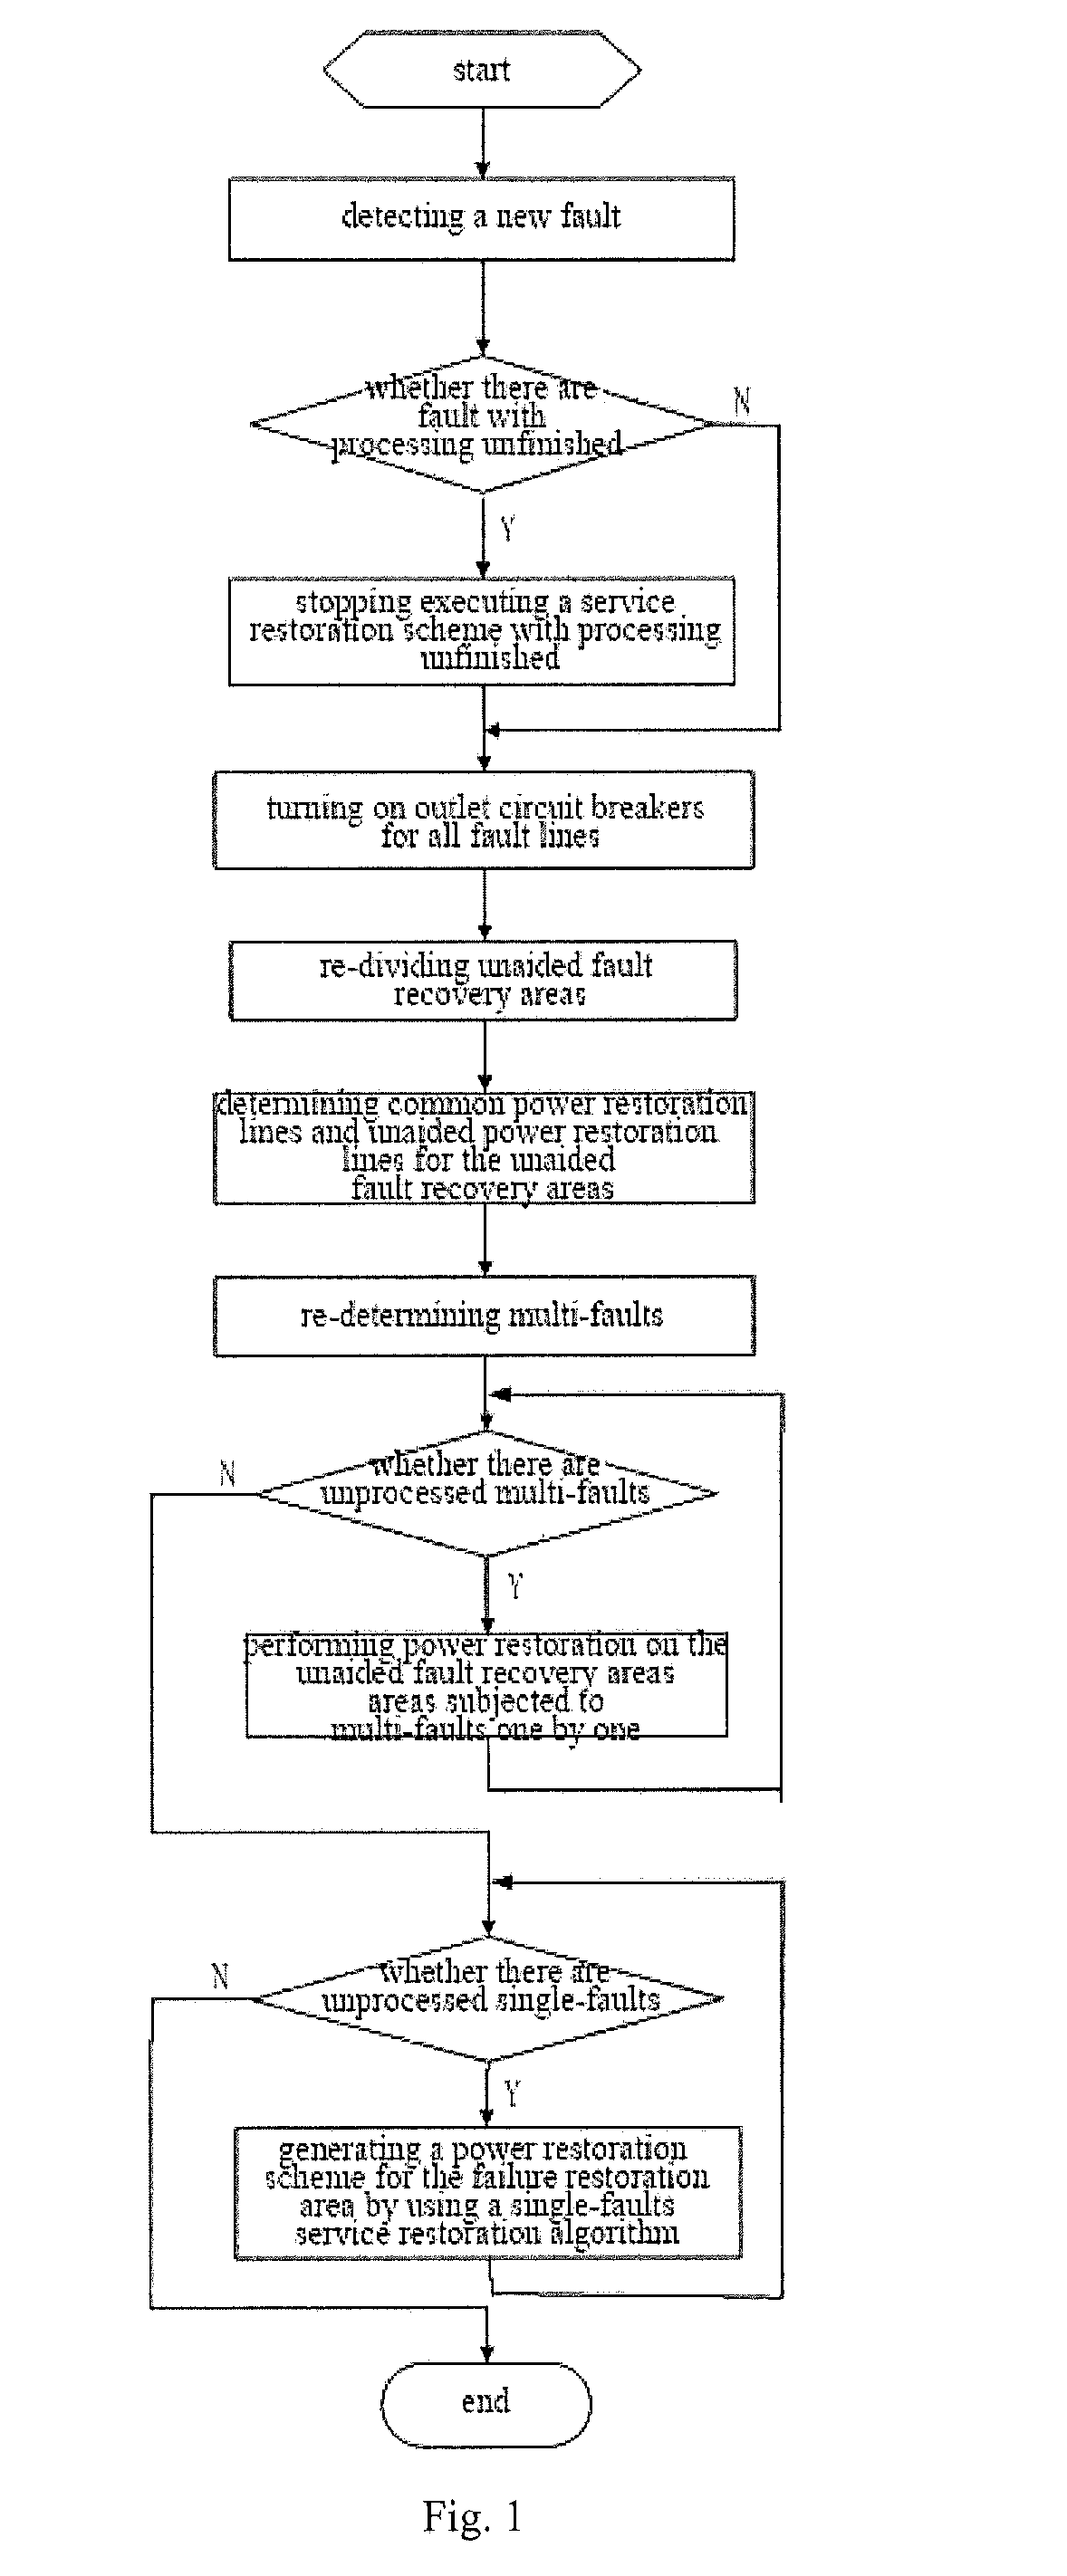 Service restoration method for multi-faults in distribution network